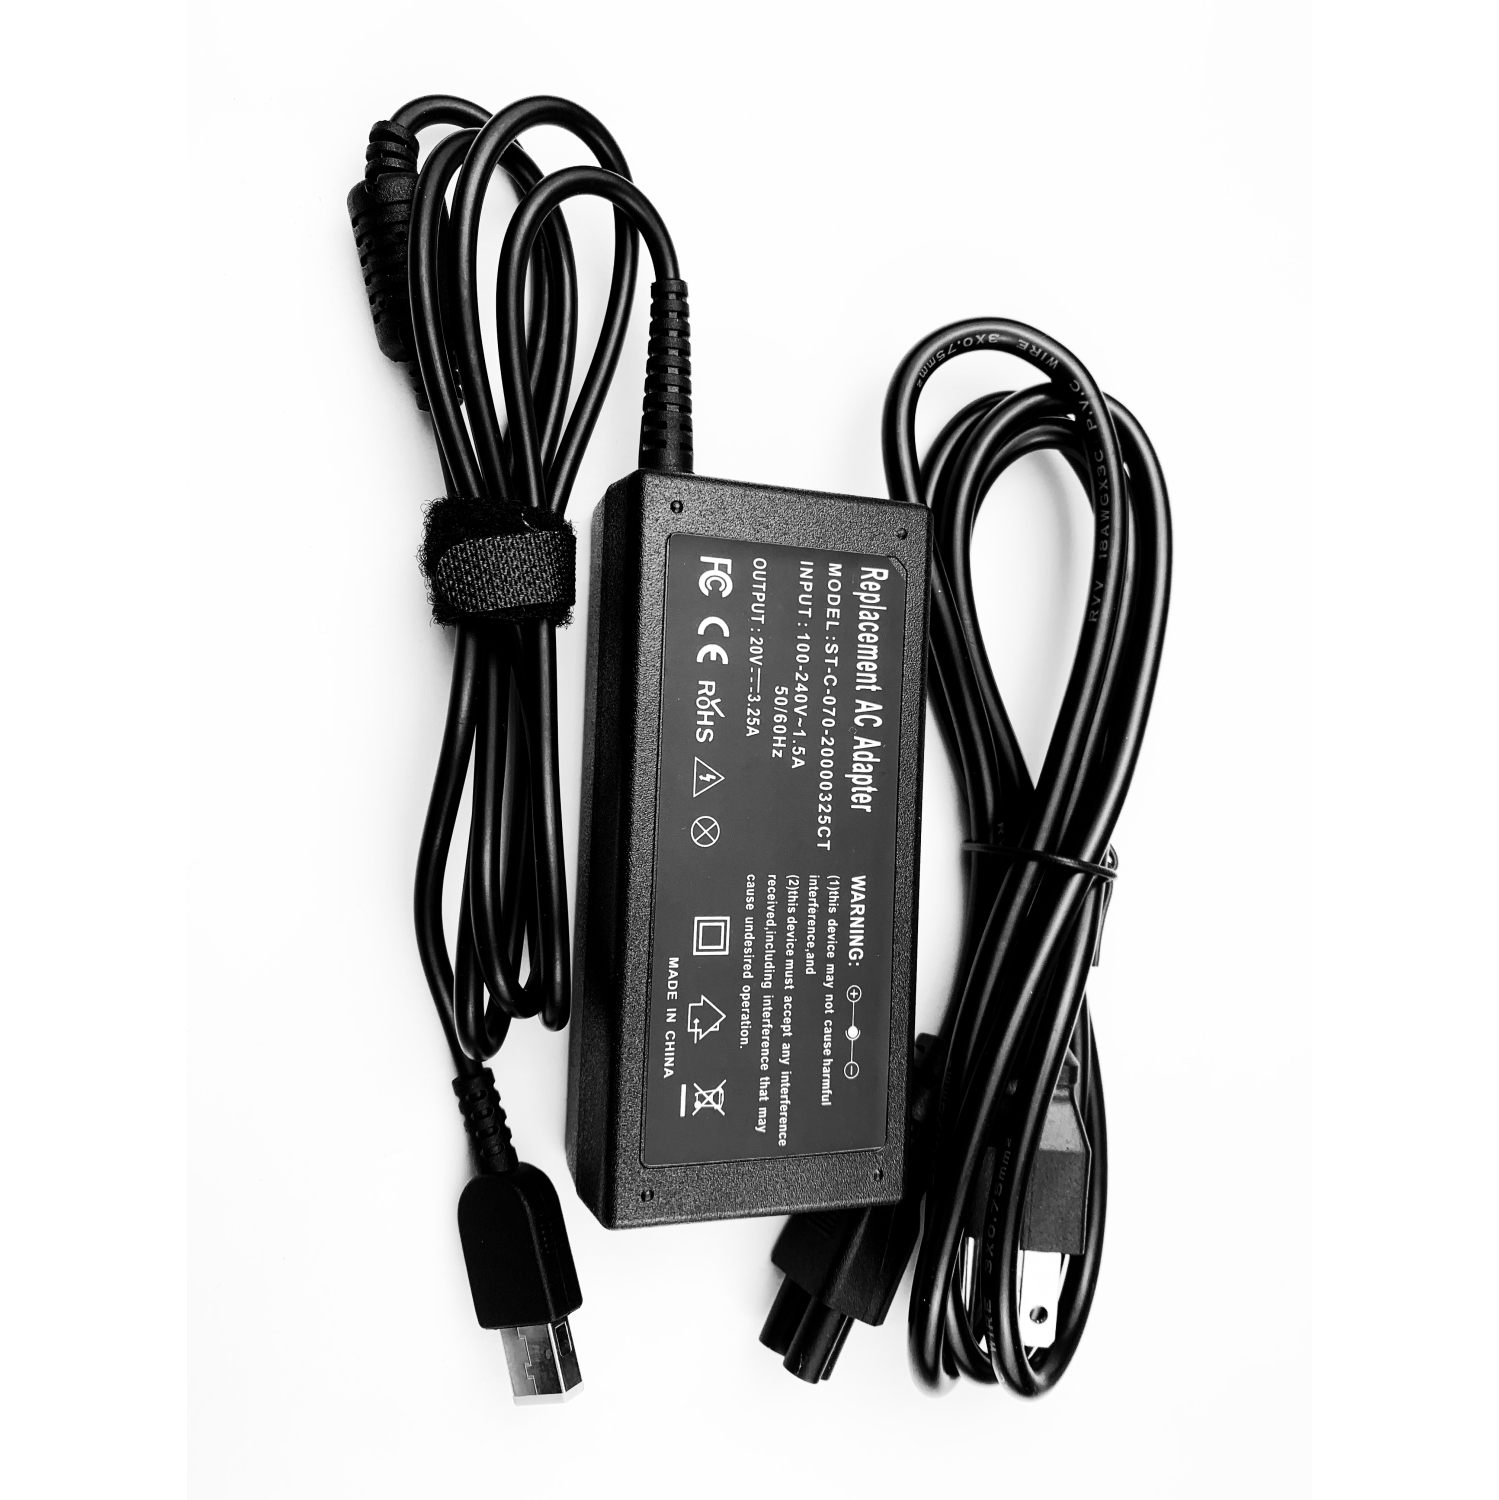 65W AC adapter charger power cord for Lenovo Flex Z50 Z51